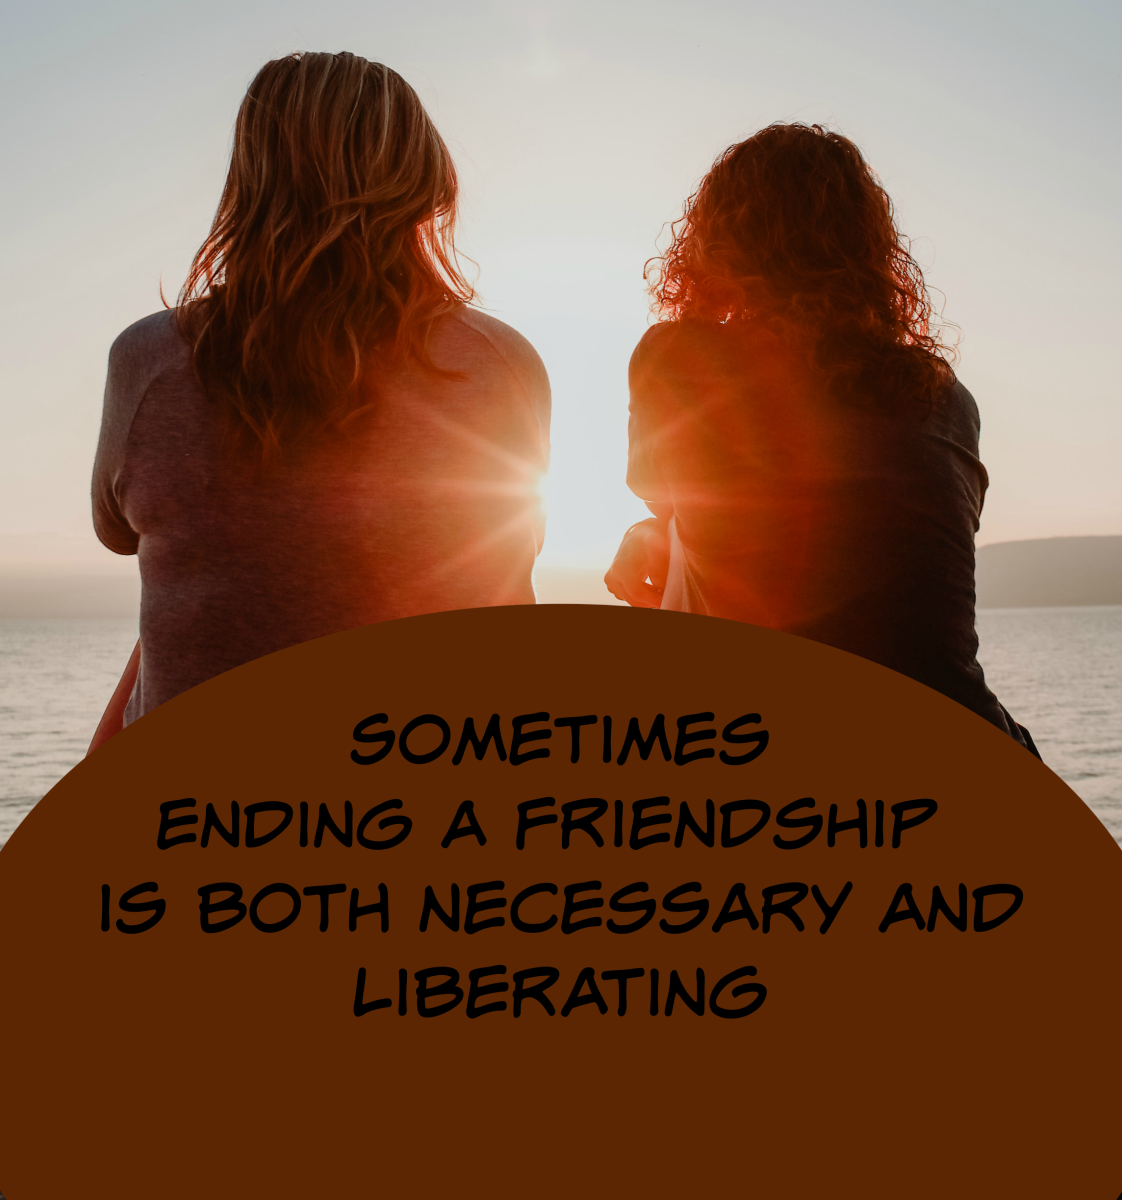 Ending a friendship can severe a bond that's keeping us stuck. 